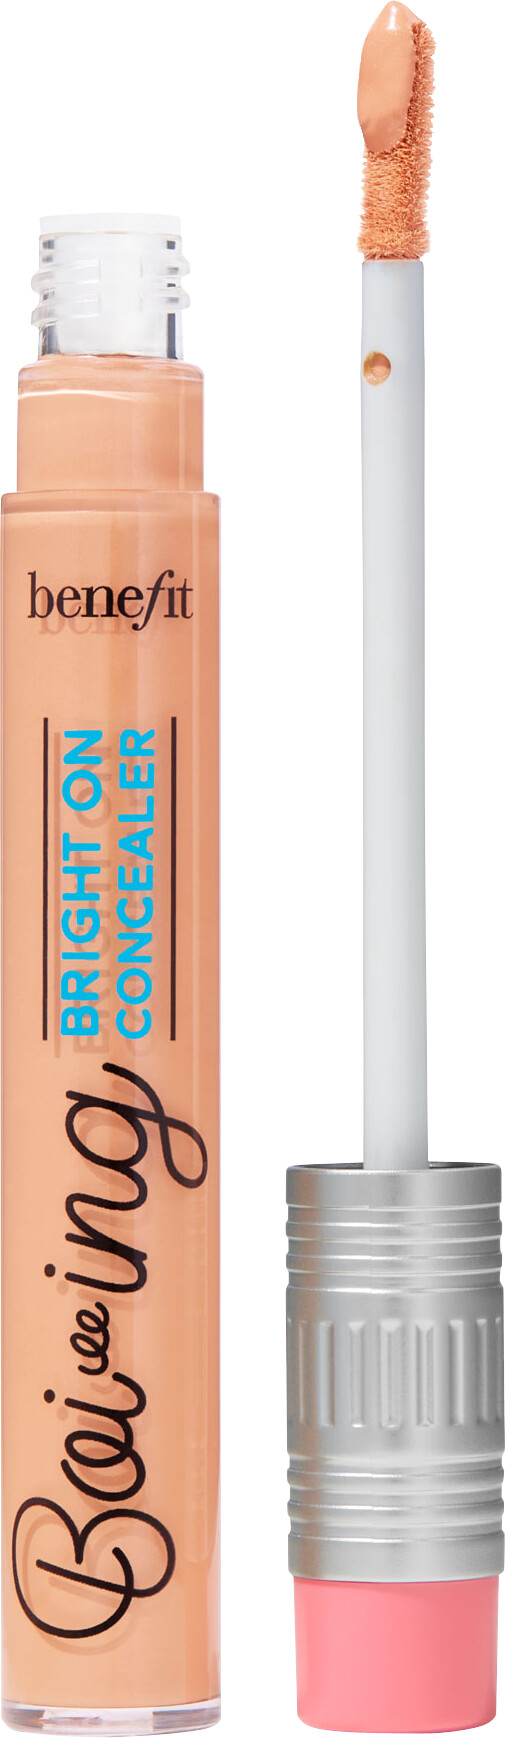 Benefit Boi-ing Bright On Concealer 5ml Melon